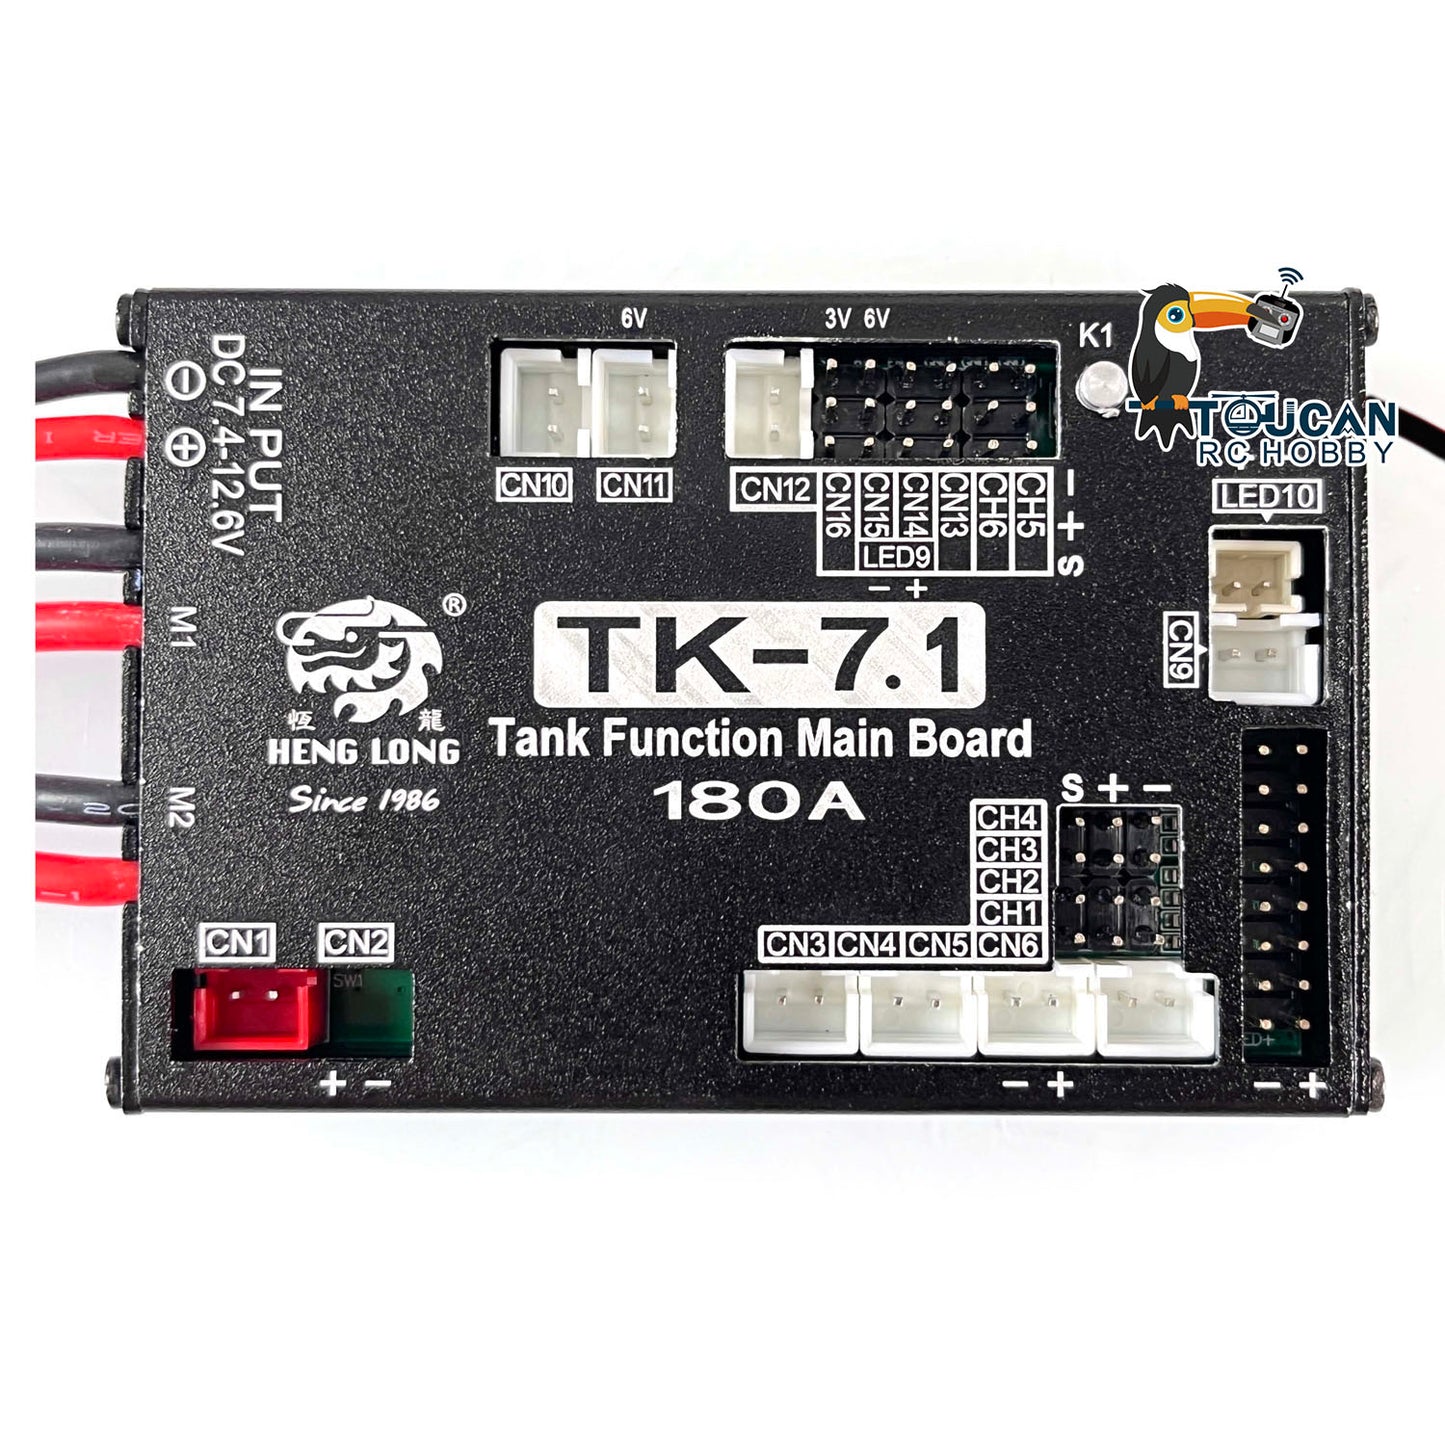 In Stock Henglong 1:16 RC Tank TK-7.1 7.1 Multi-Function Main Board With Leopard2A6 M1A2 or Tiger1 T90 Sound 7.1 Transmitter Radio Controller